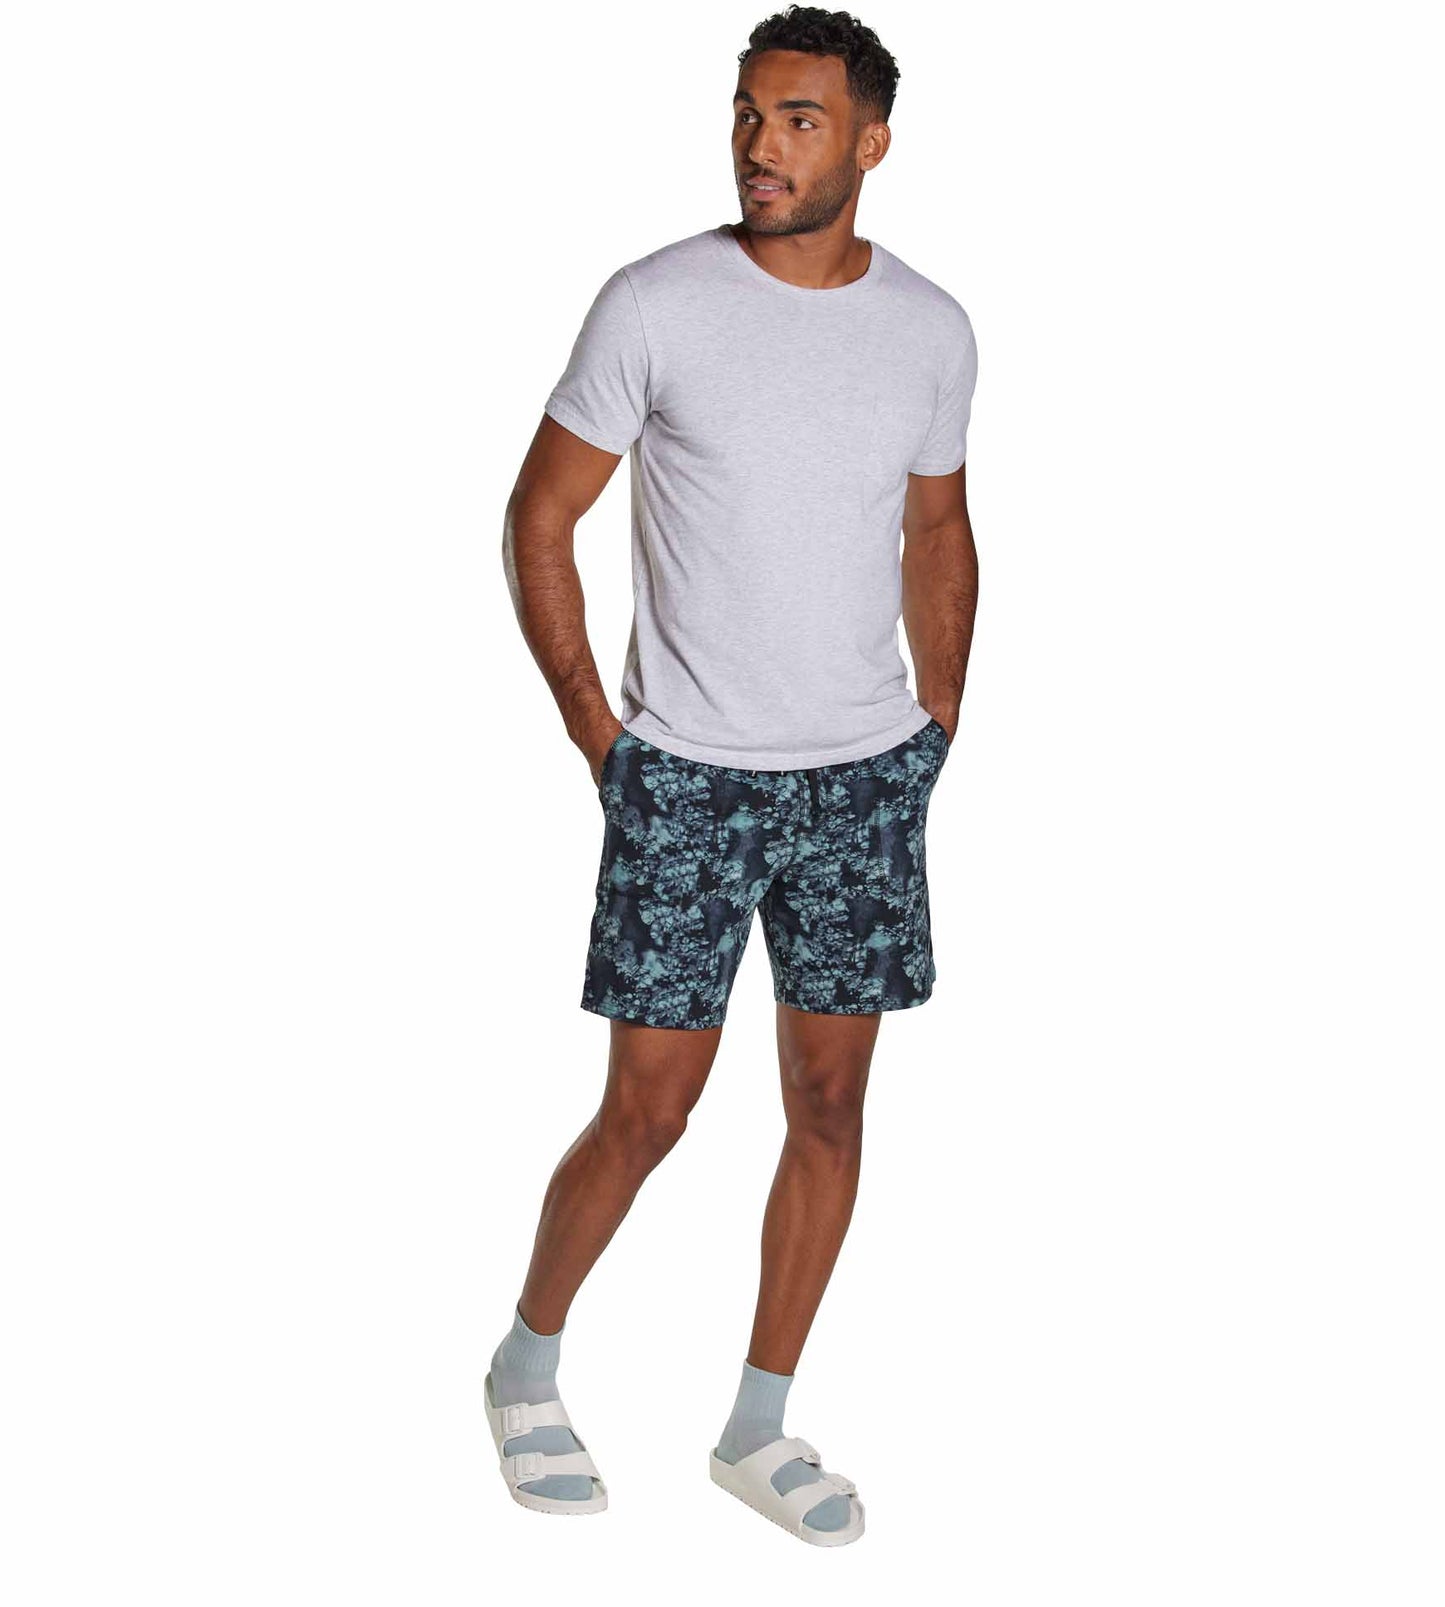 Off Duty Super Soft Lounge Sho Supersoft Lounge Short White, Saddle brown, Silver, Dim gray, Dark slate gray, Sienna, Dark Gray, Dark slate gray, Light Gray, Indian red